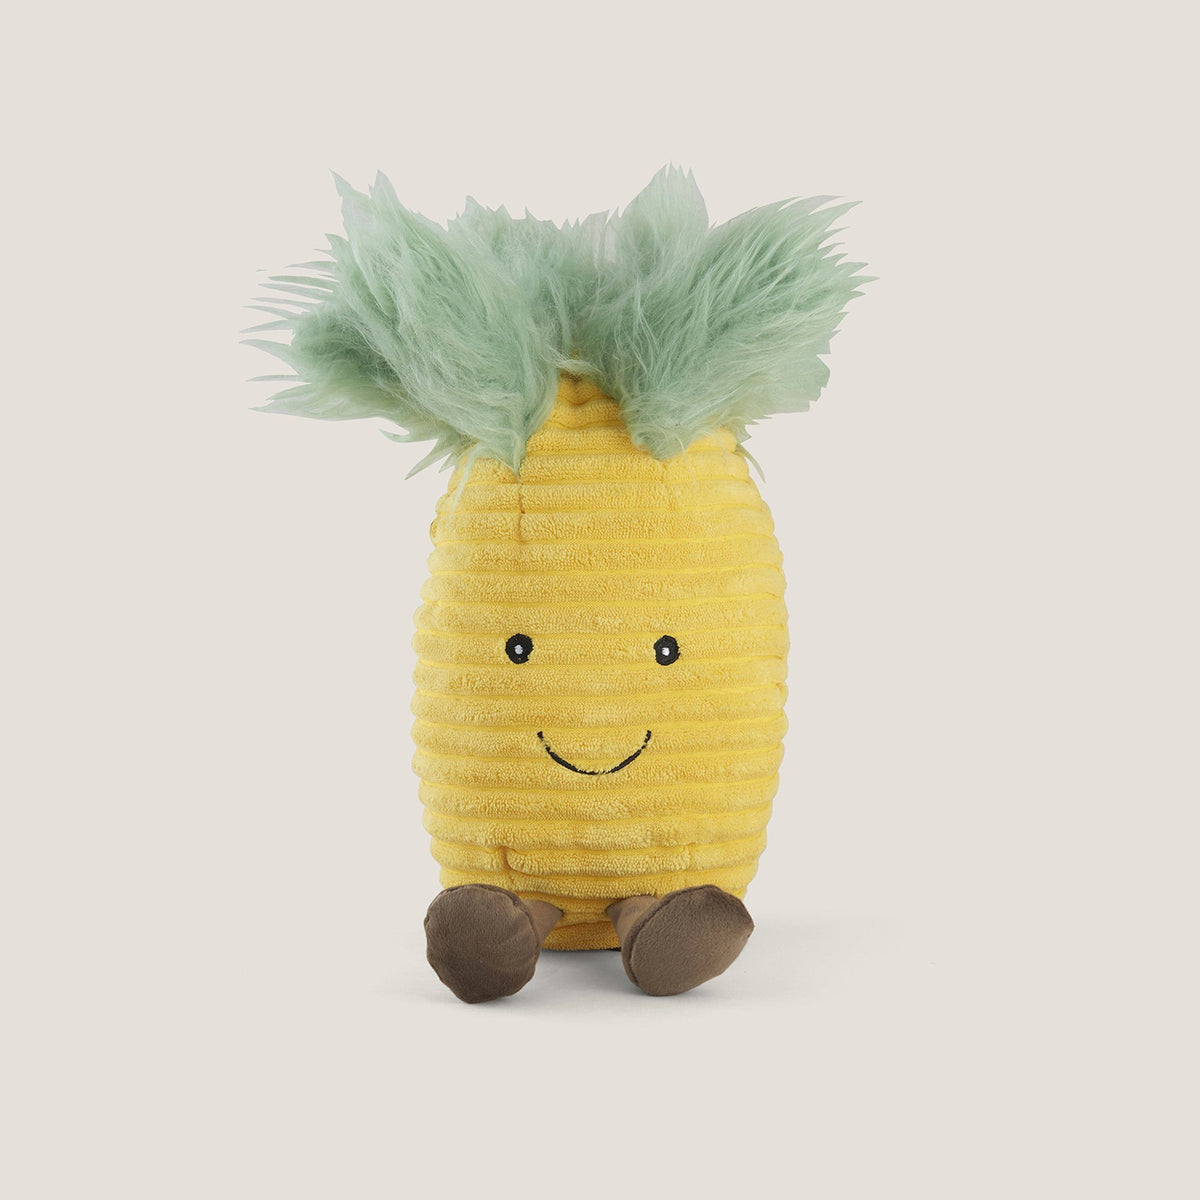 Stripped Pineapple Toy